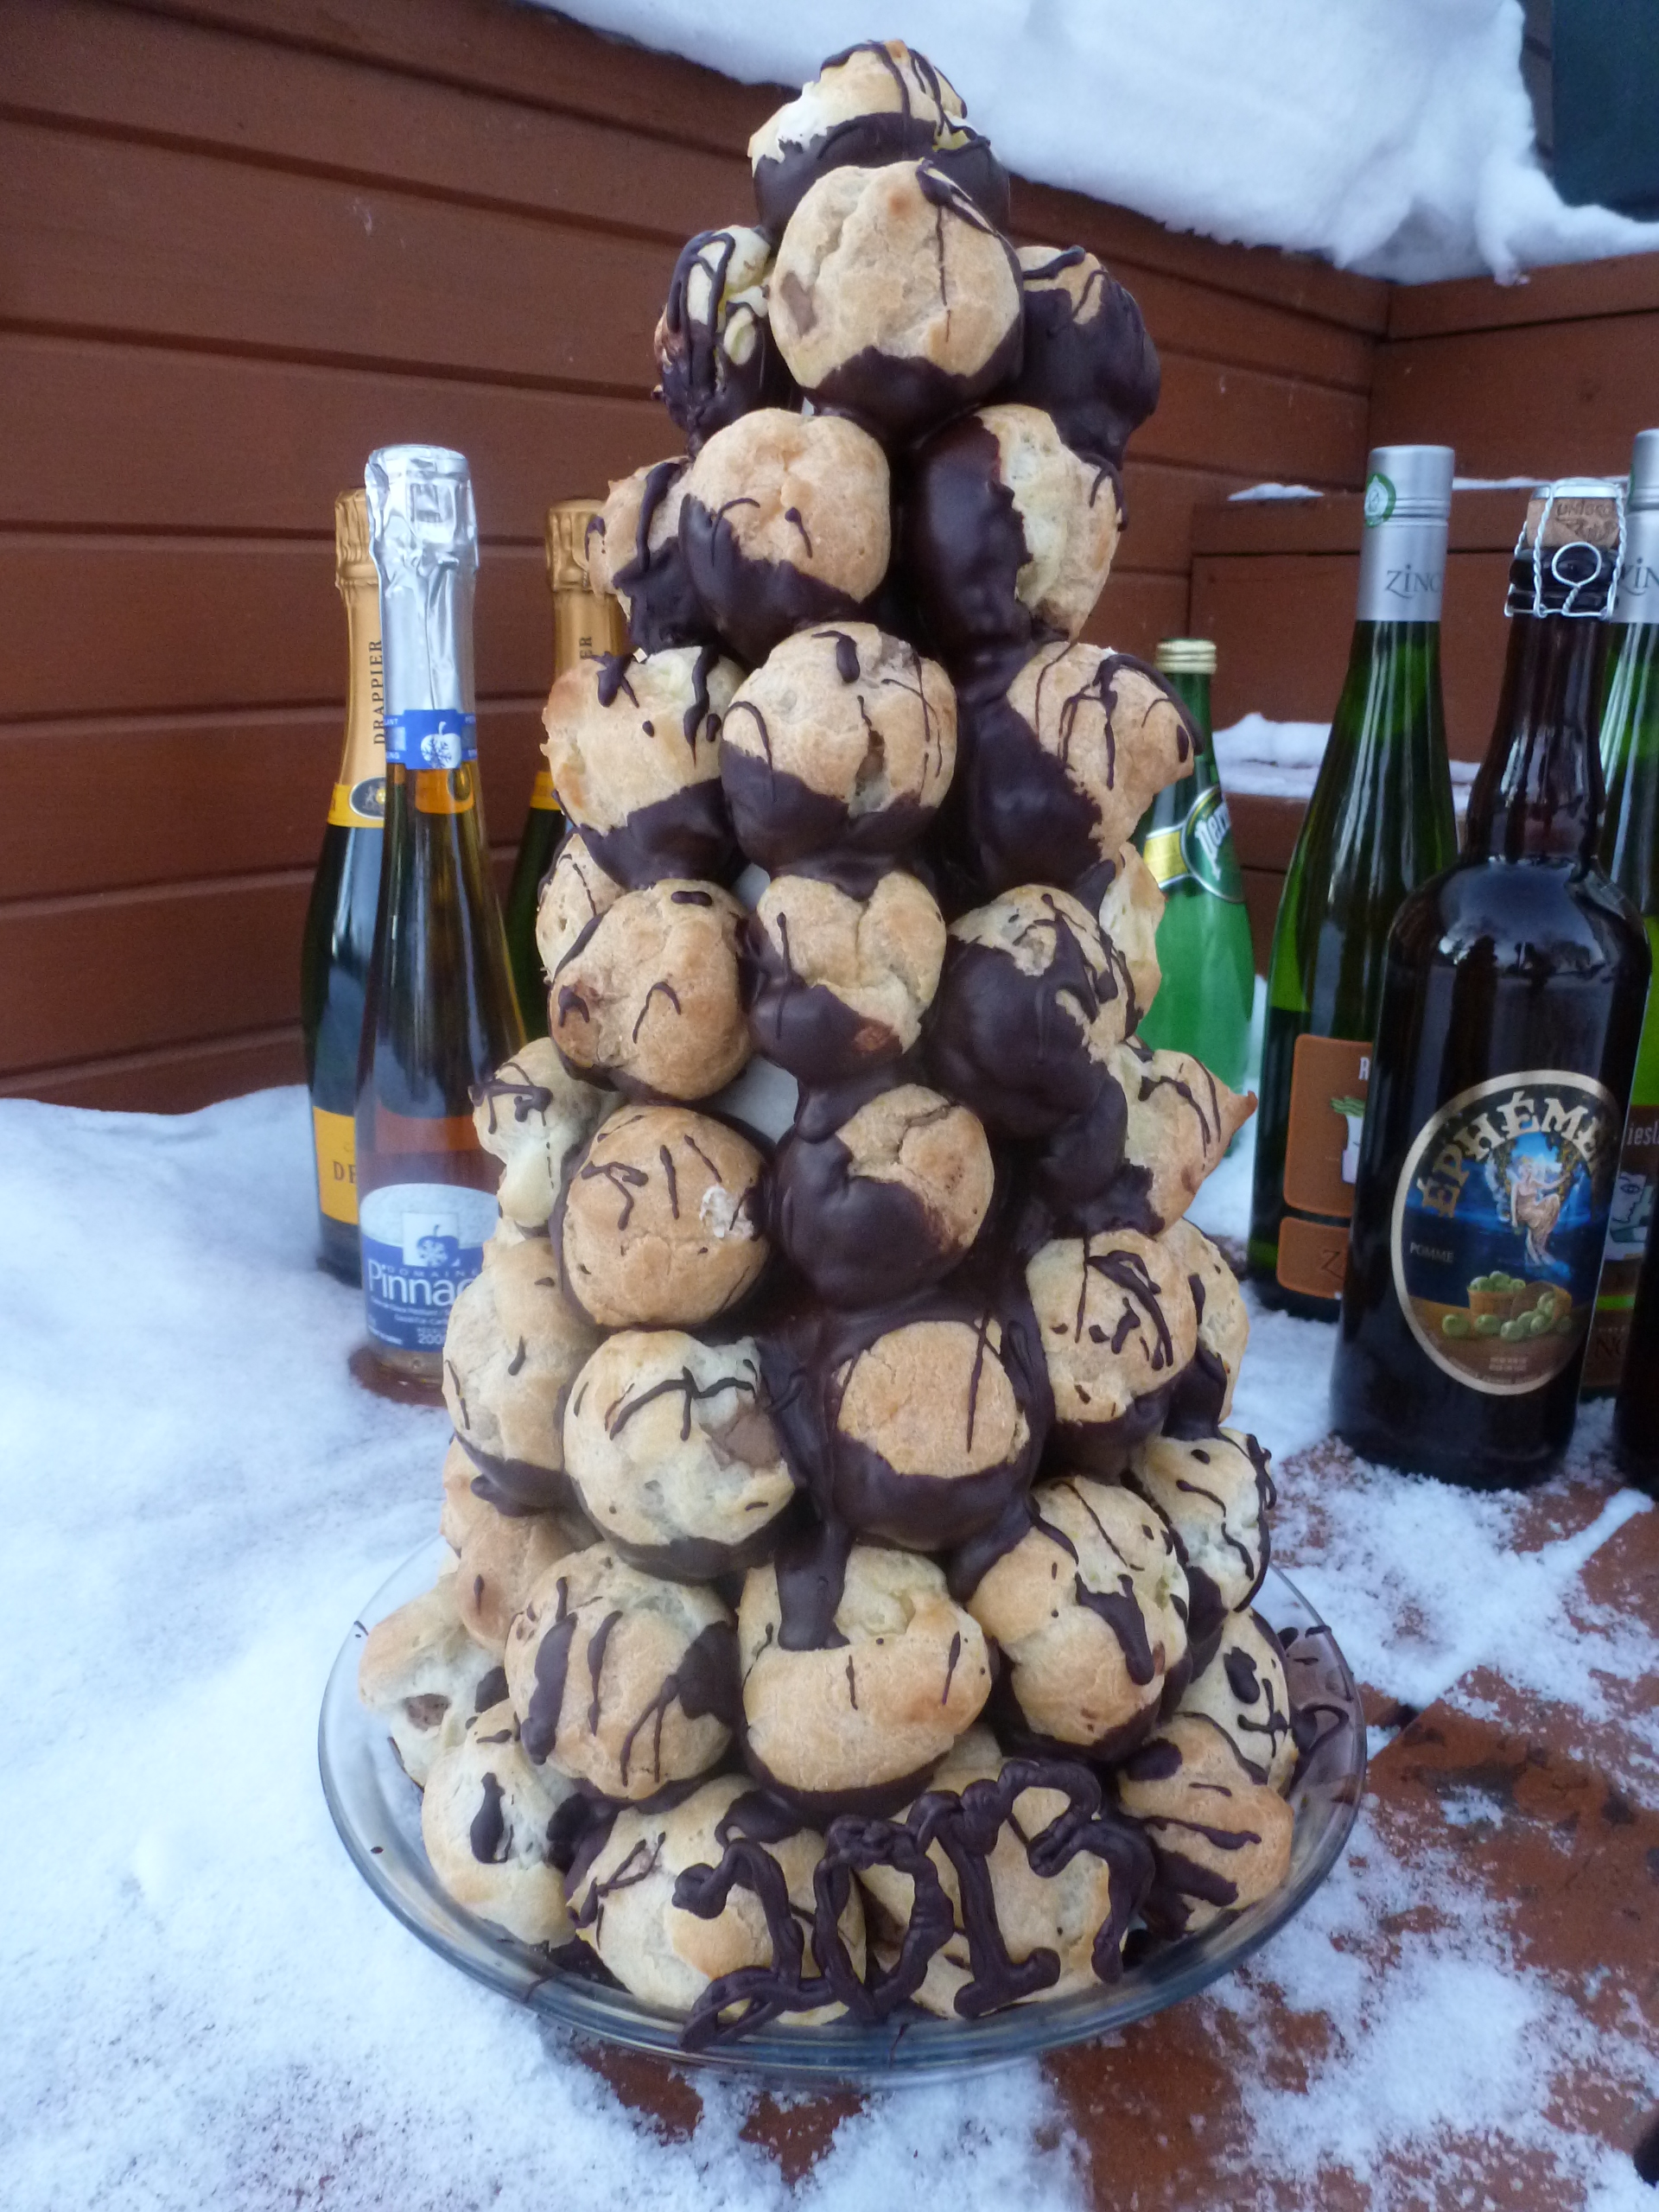 A croquembouche made with chocolate instead of caramel... a chocembouche.